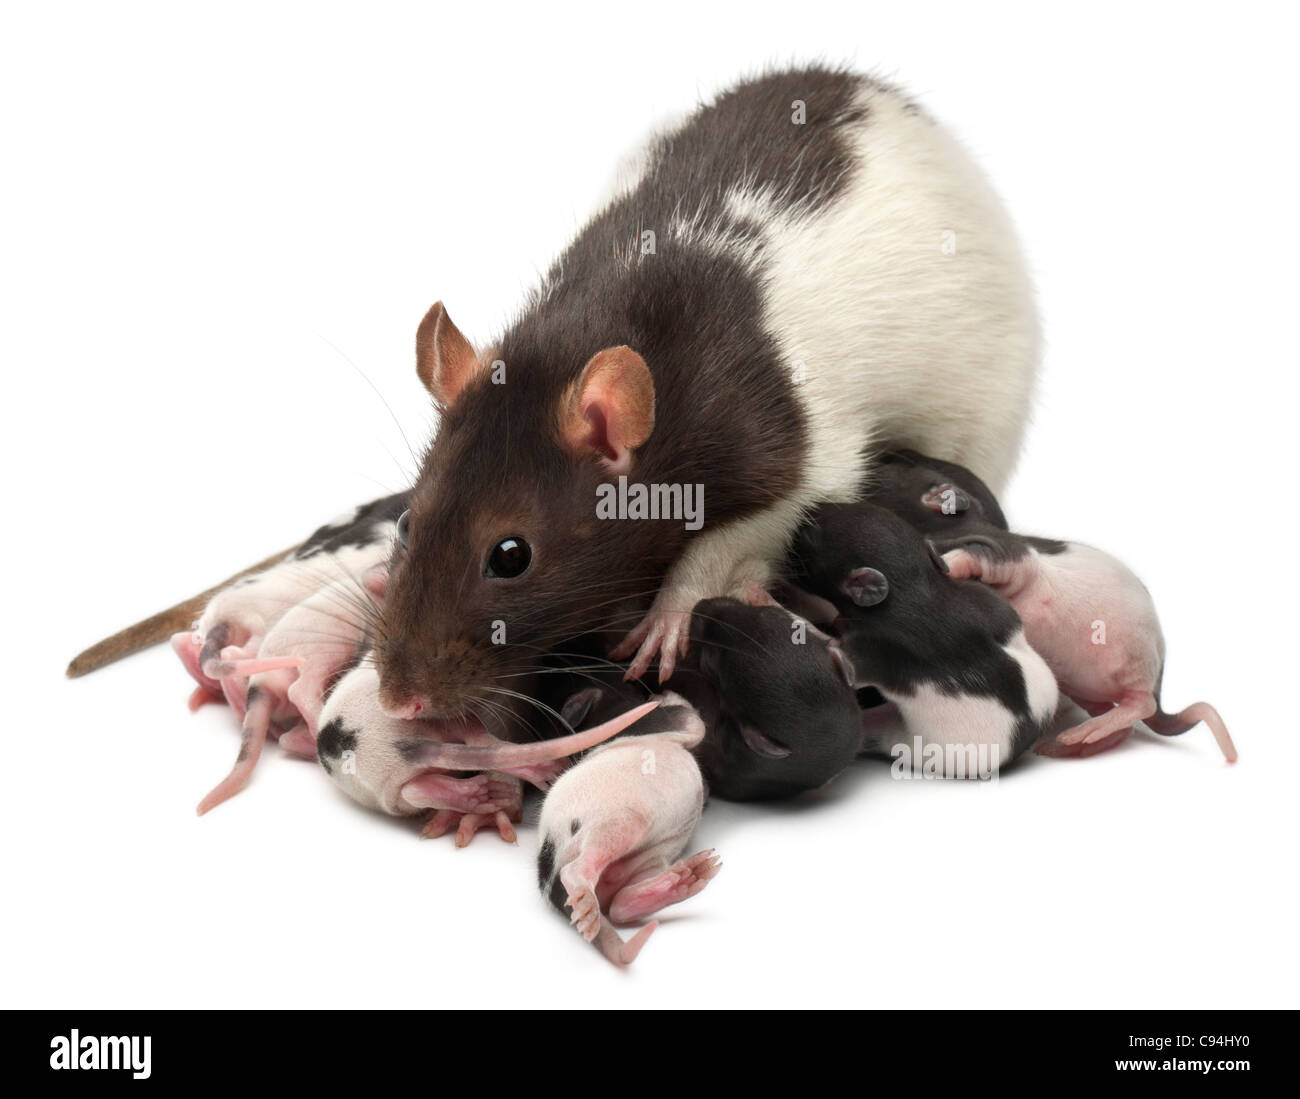 Fancy Rat feeding its babies in front of white background Stock Photo